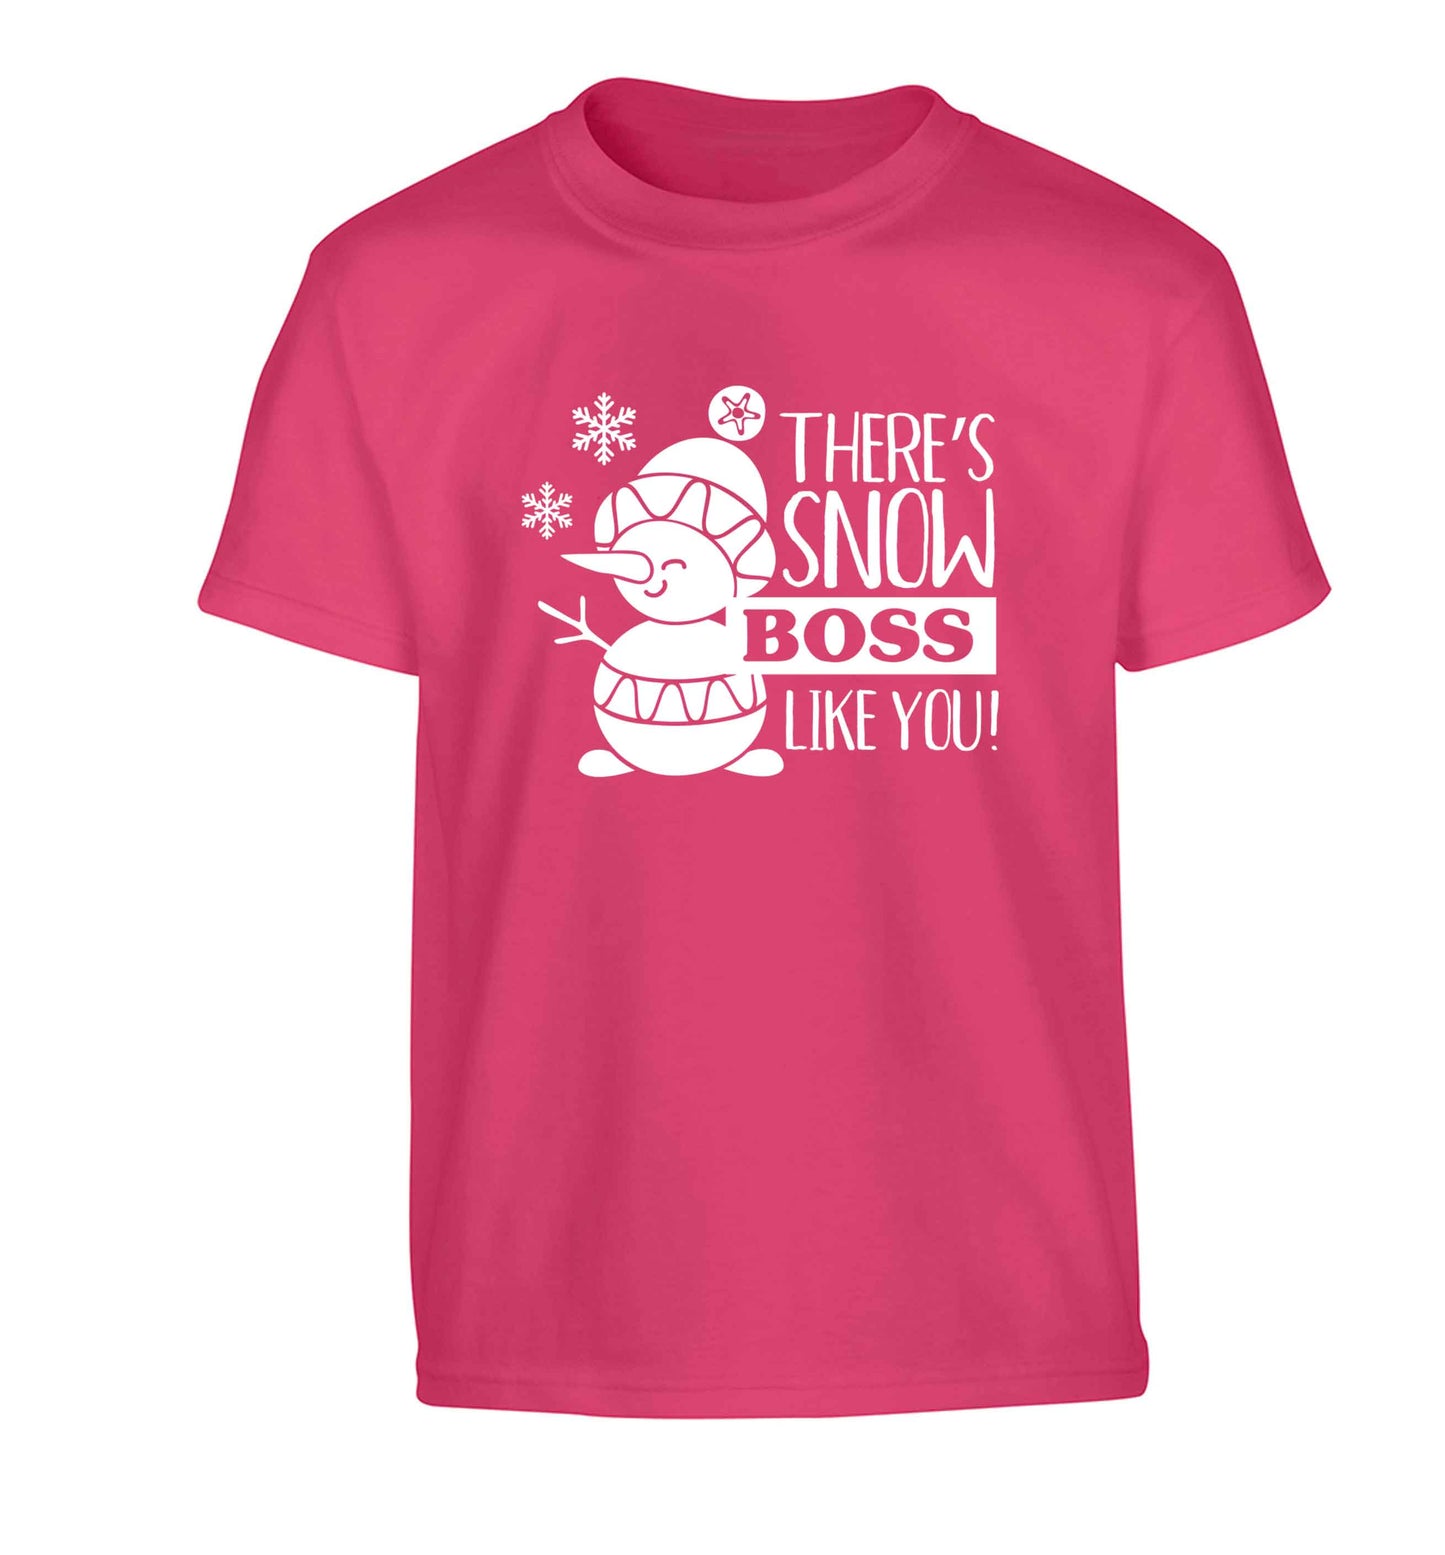 There's snow boss like you Children's pink Tshirt 12-13 Years